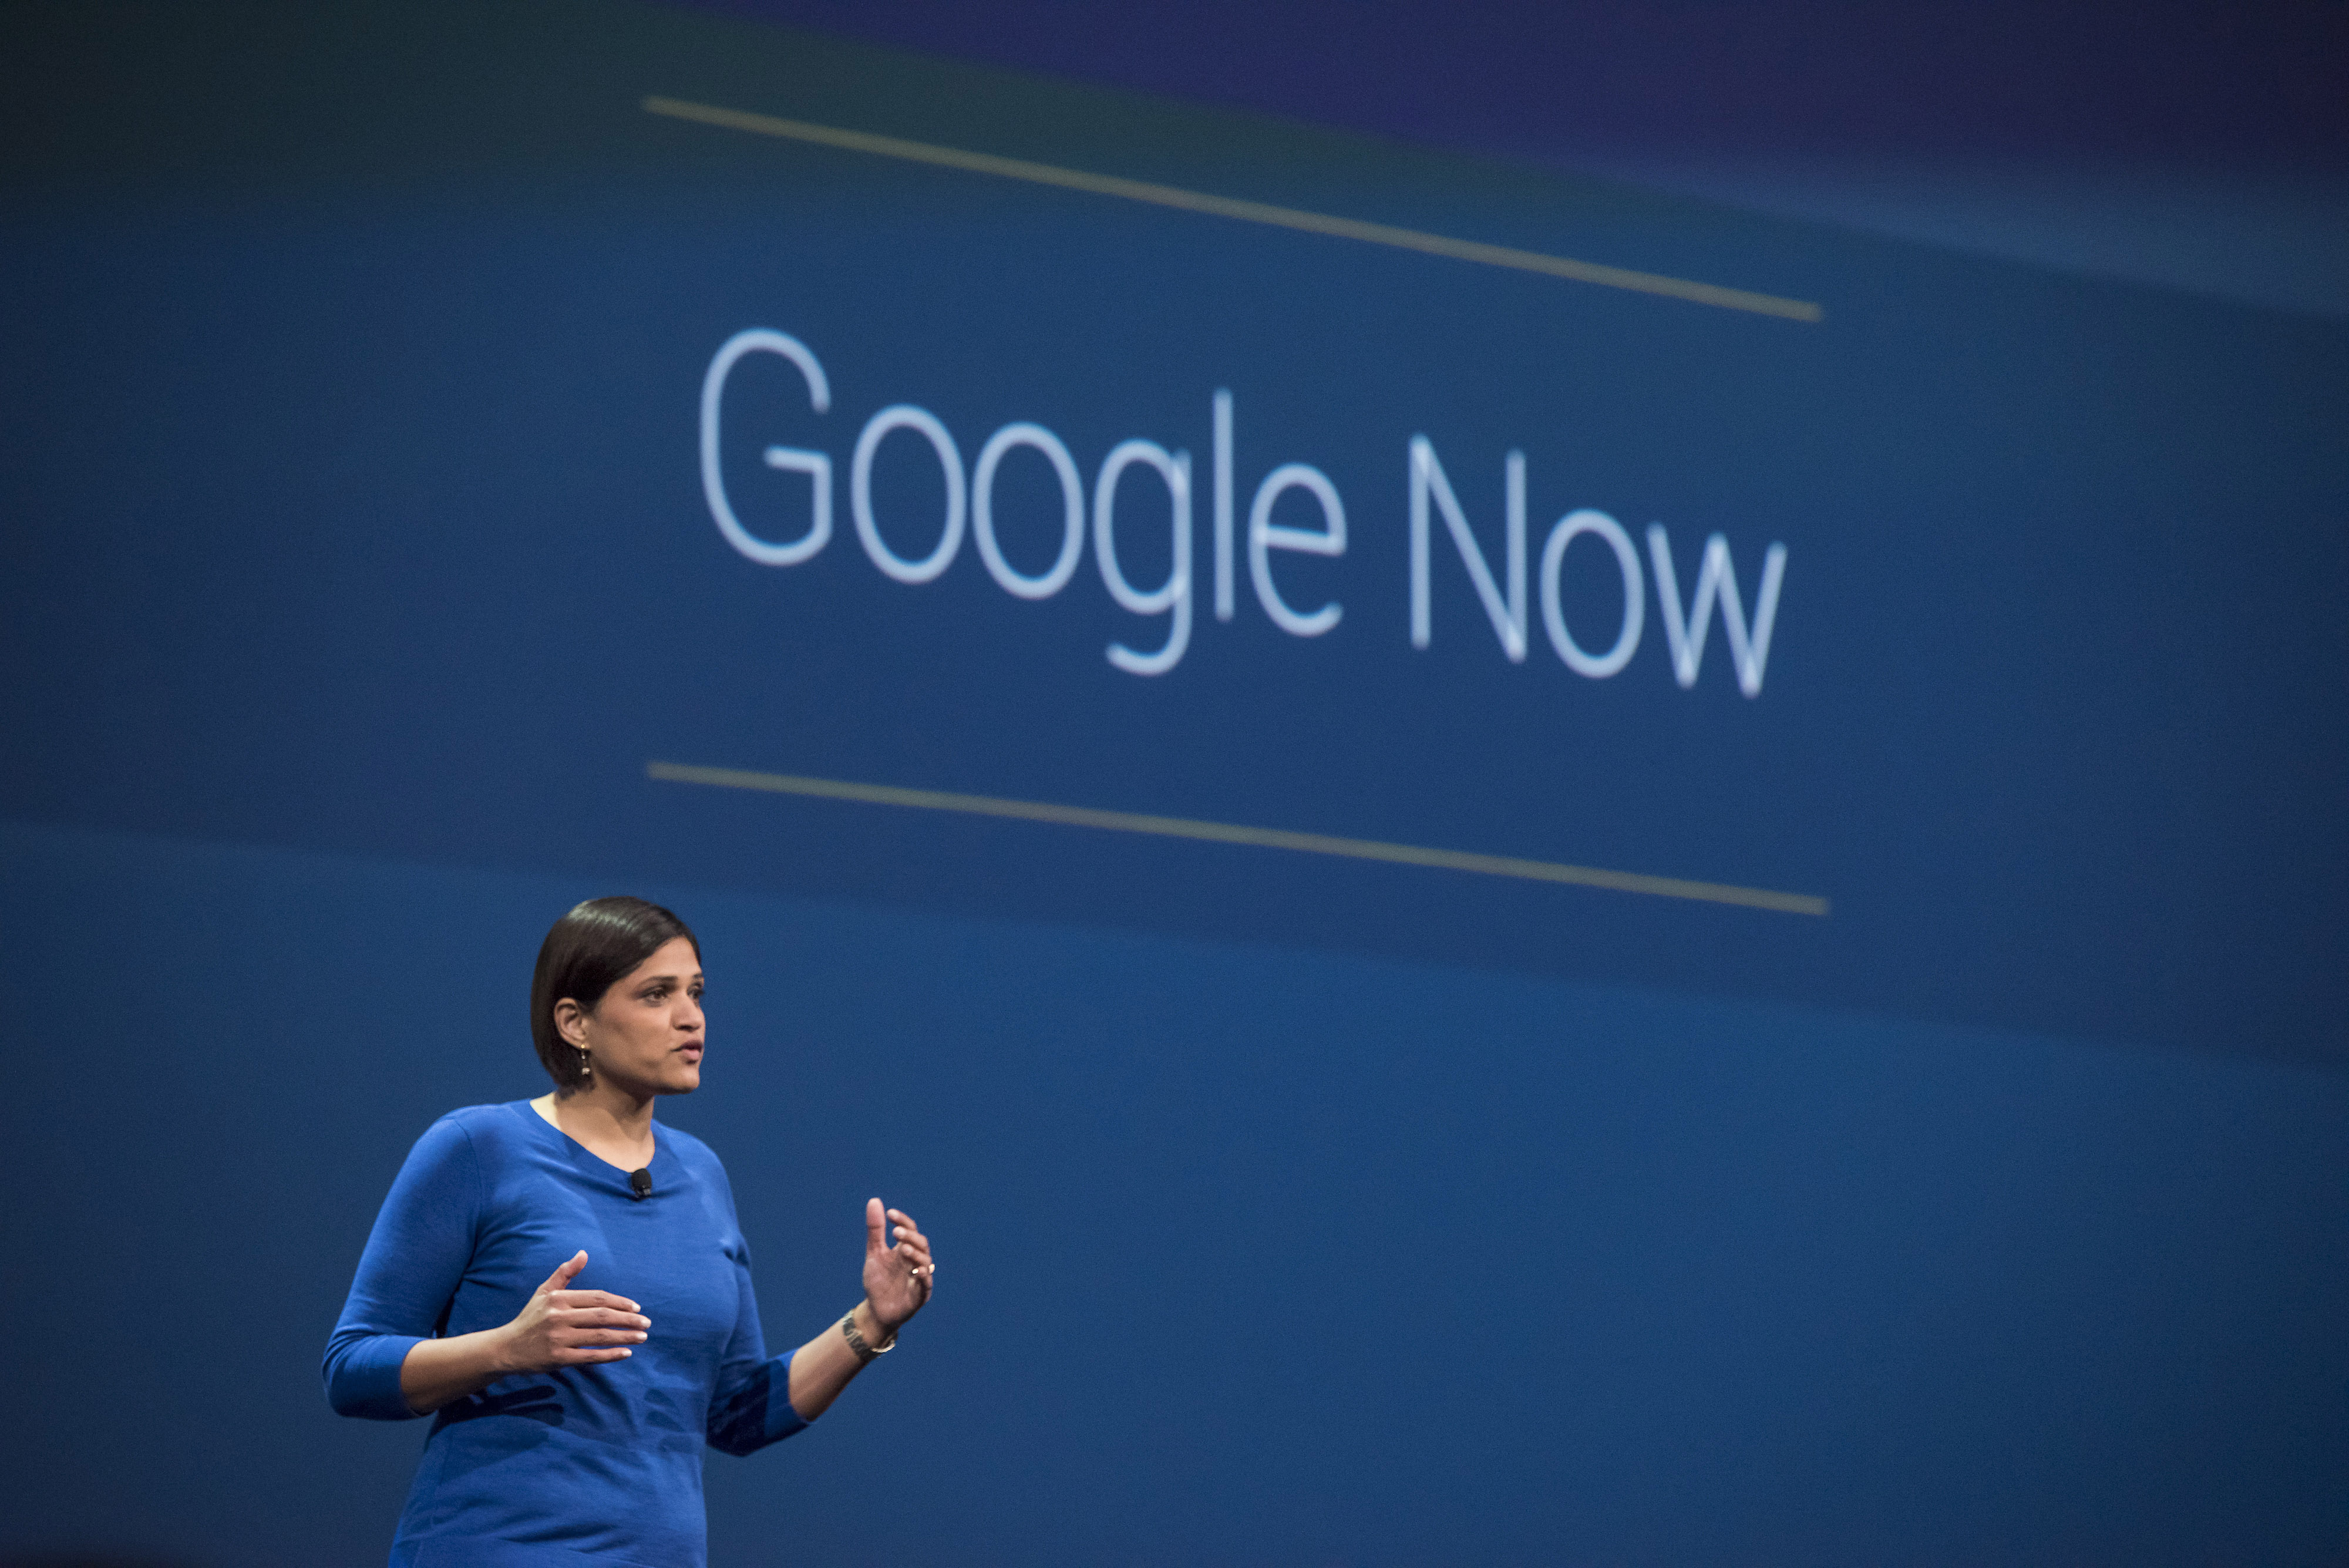 Aparna Chennapragada, director of Google Now for Google Inc., speaks during the Google I/O Annual Developers Conference in San Francisco, California, U.S., on Thursday, May 28, 2015. (Bloomberg&mdash;Bloomberg via Getty Images)